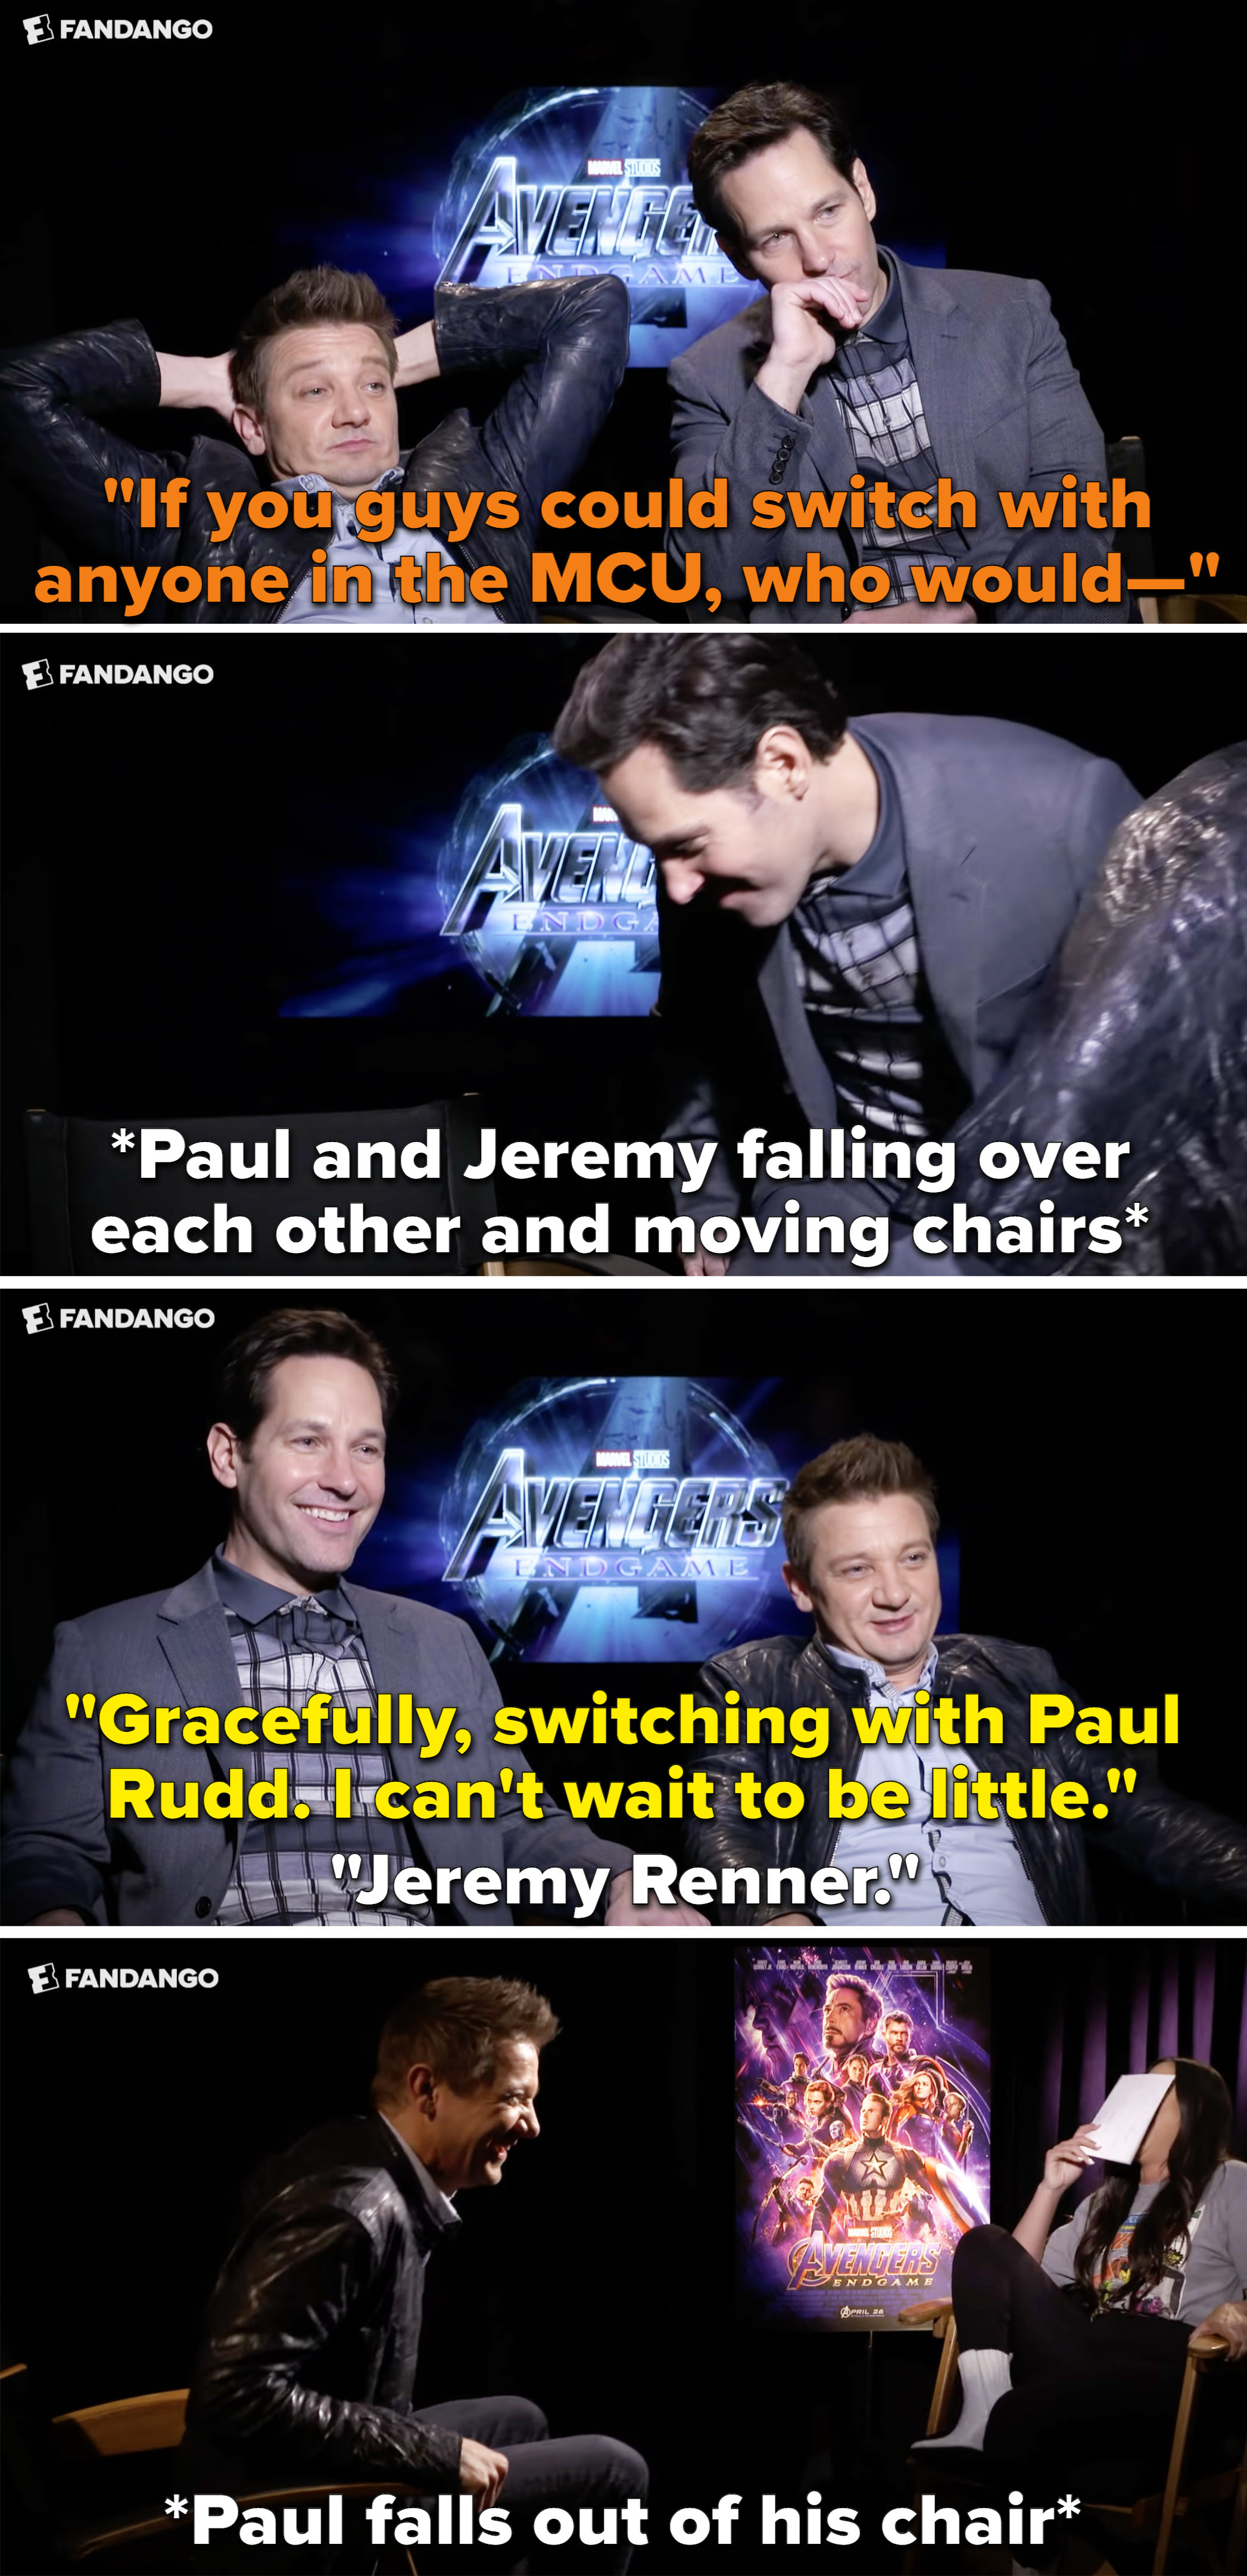 Paul and Jeremy tripping over each other while switching chairs